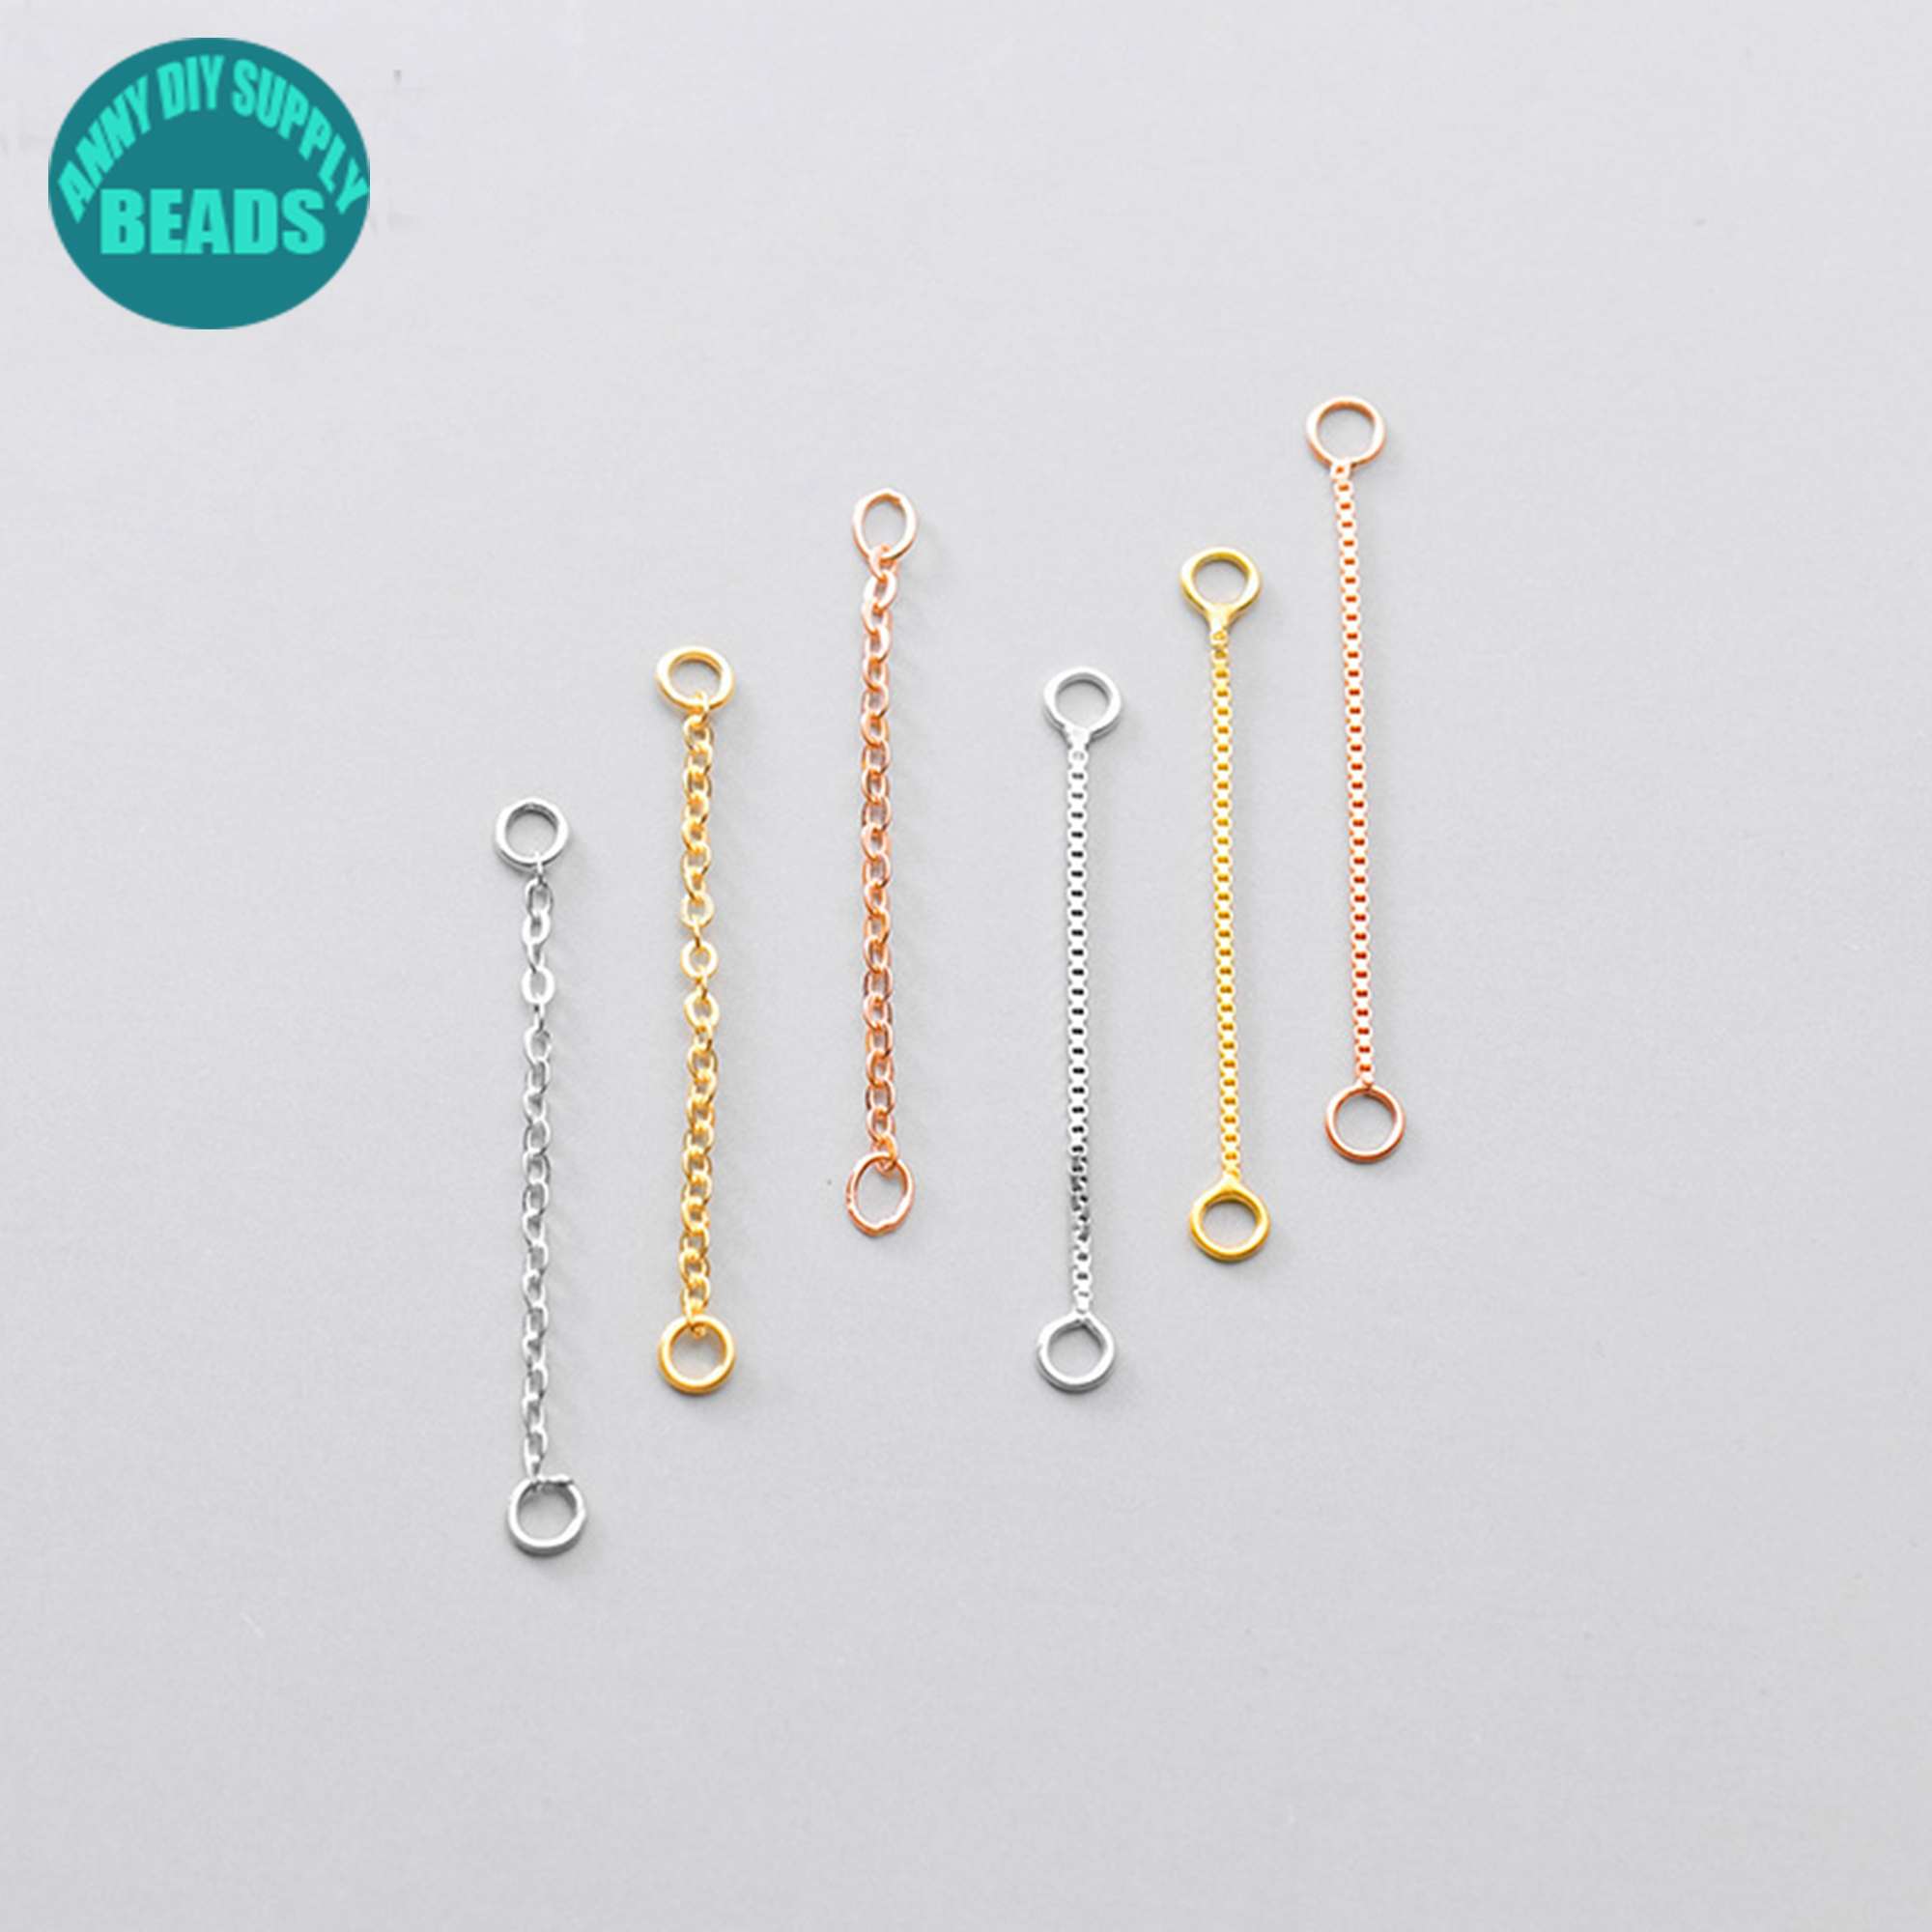 Aggregate more than 221 chain connector earrings latest